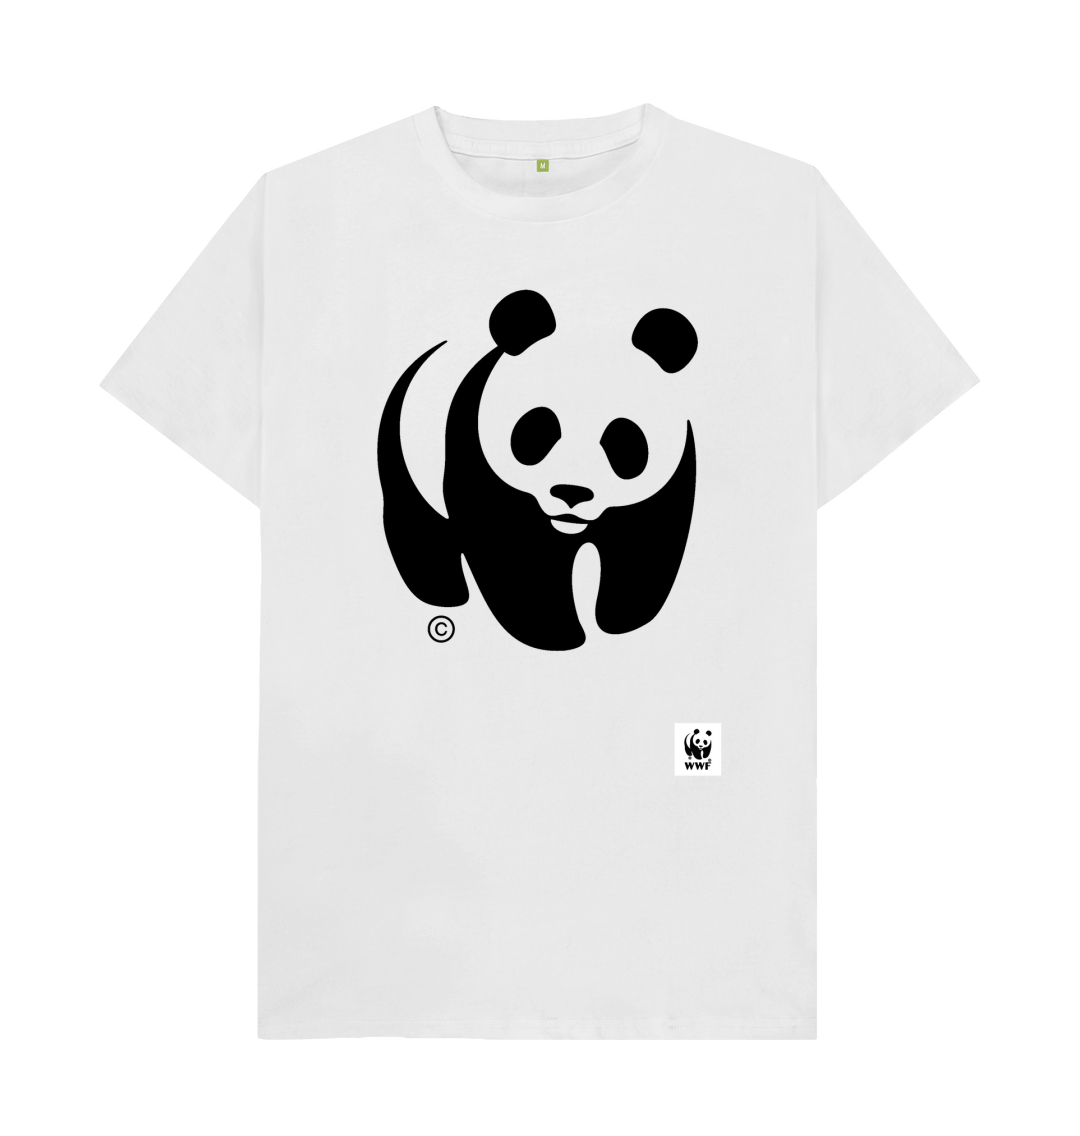 T Shirt for Entrepreneurs Cotton T Shirt by The Skunk Labs Logo with Pandas